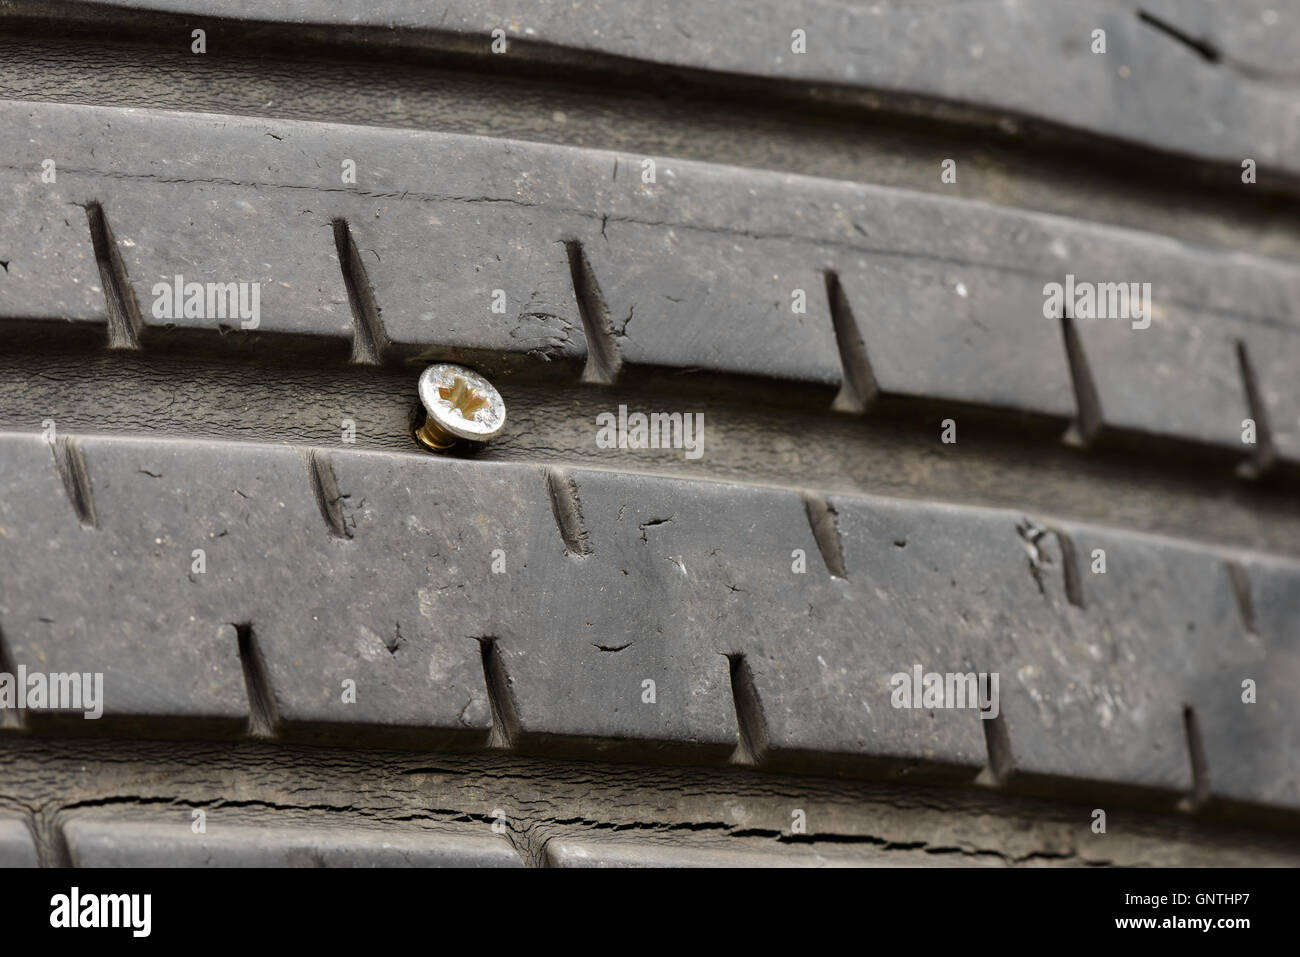 A flat tire by a little long screw Stock Photo